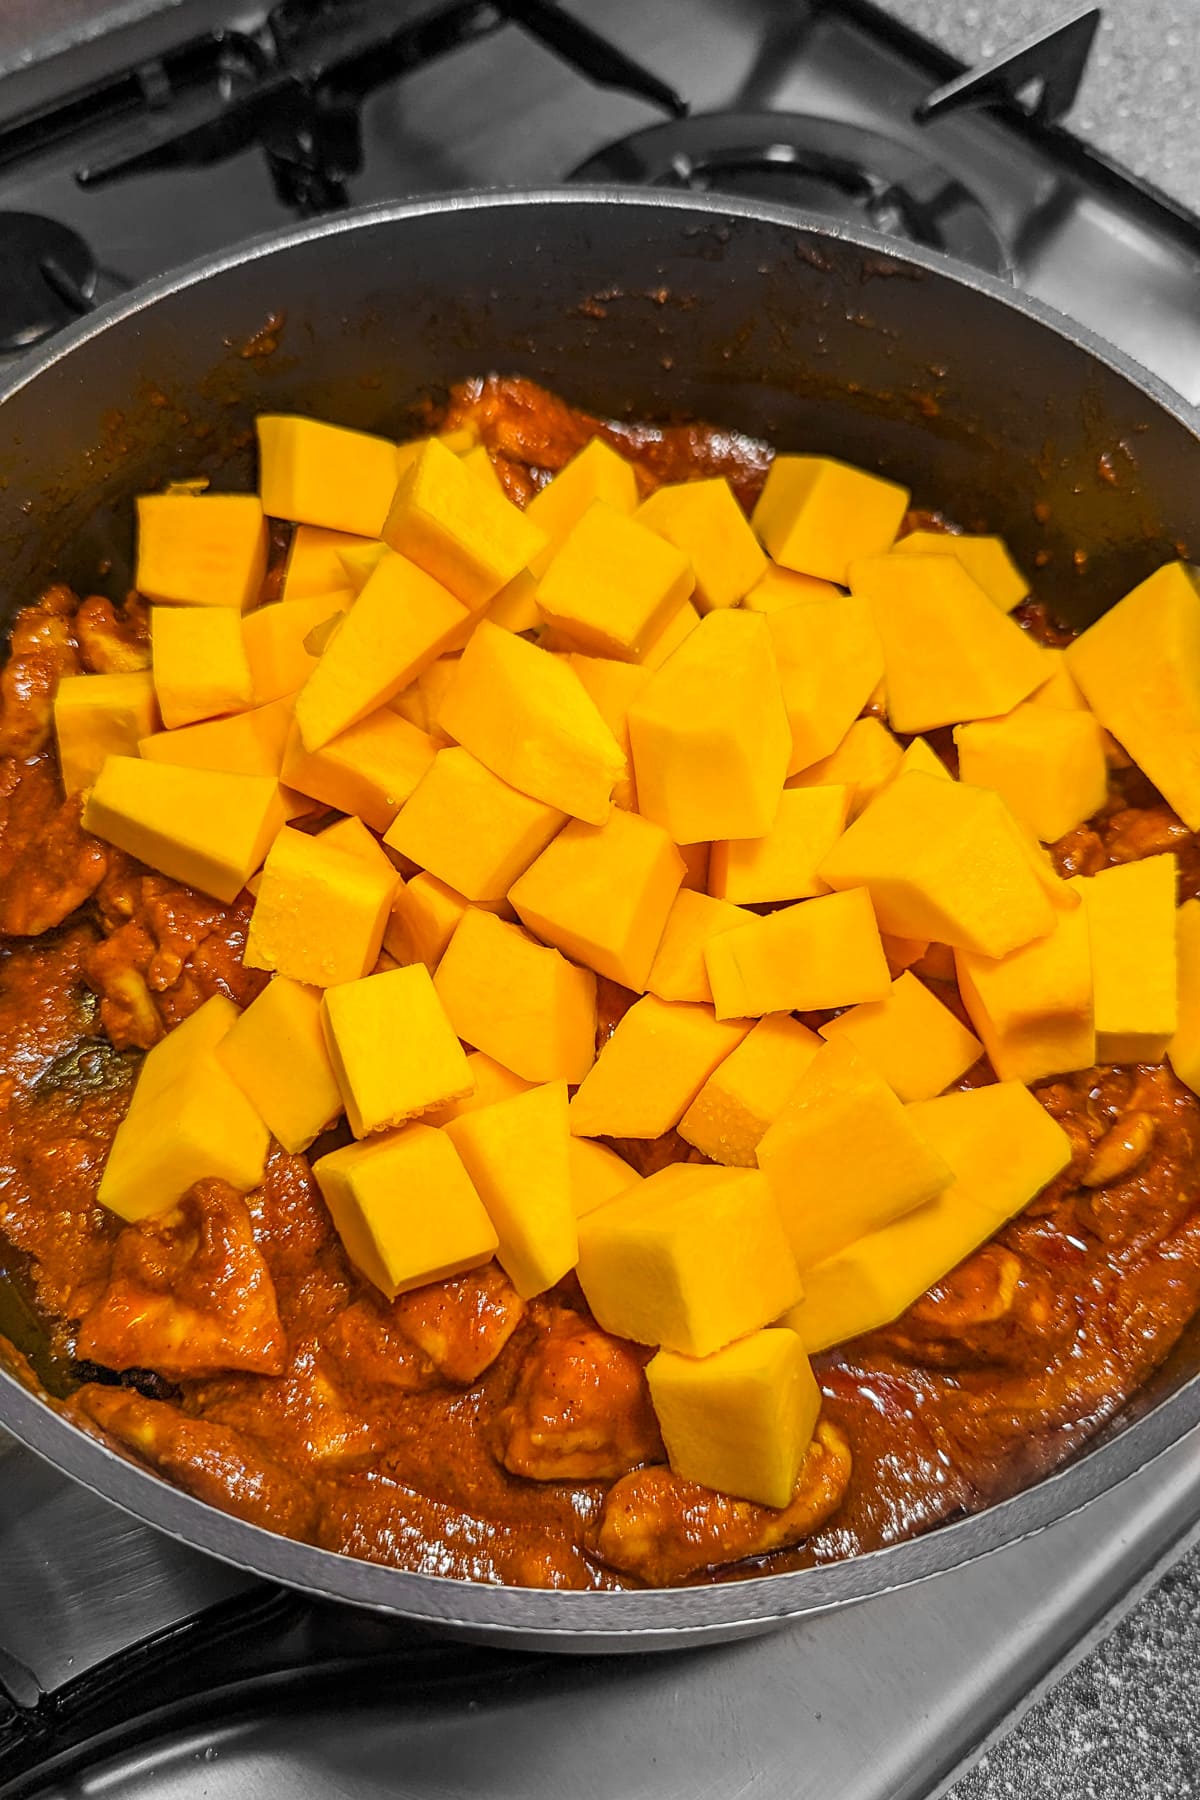 Adding pumpkin cubes over meat pieces in a pan on the stove.